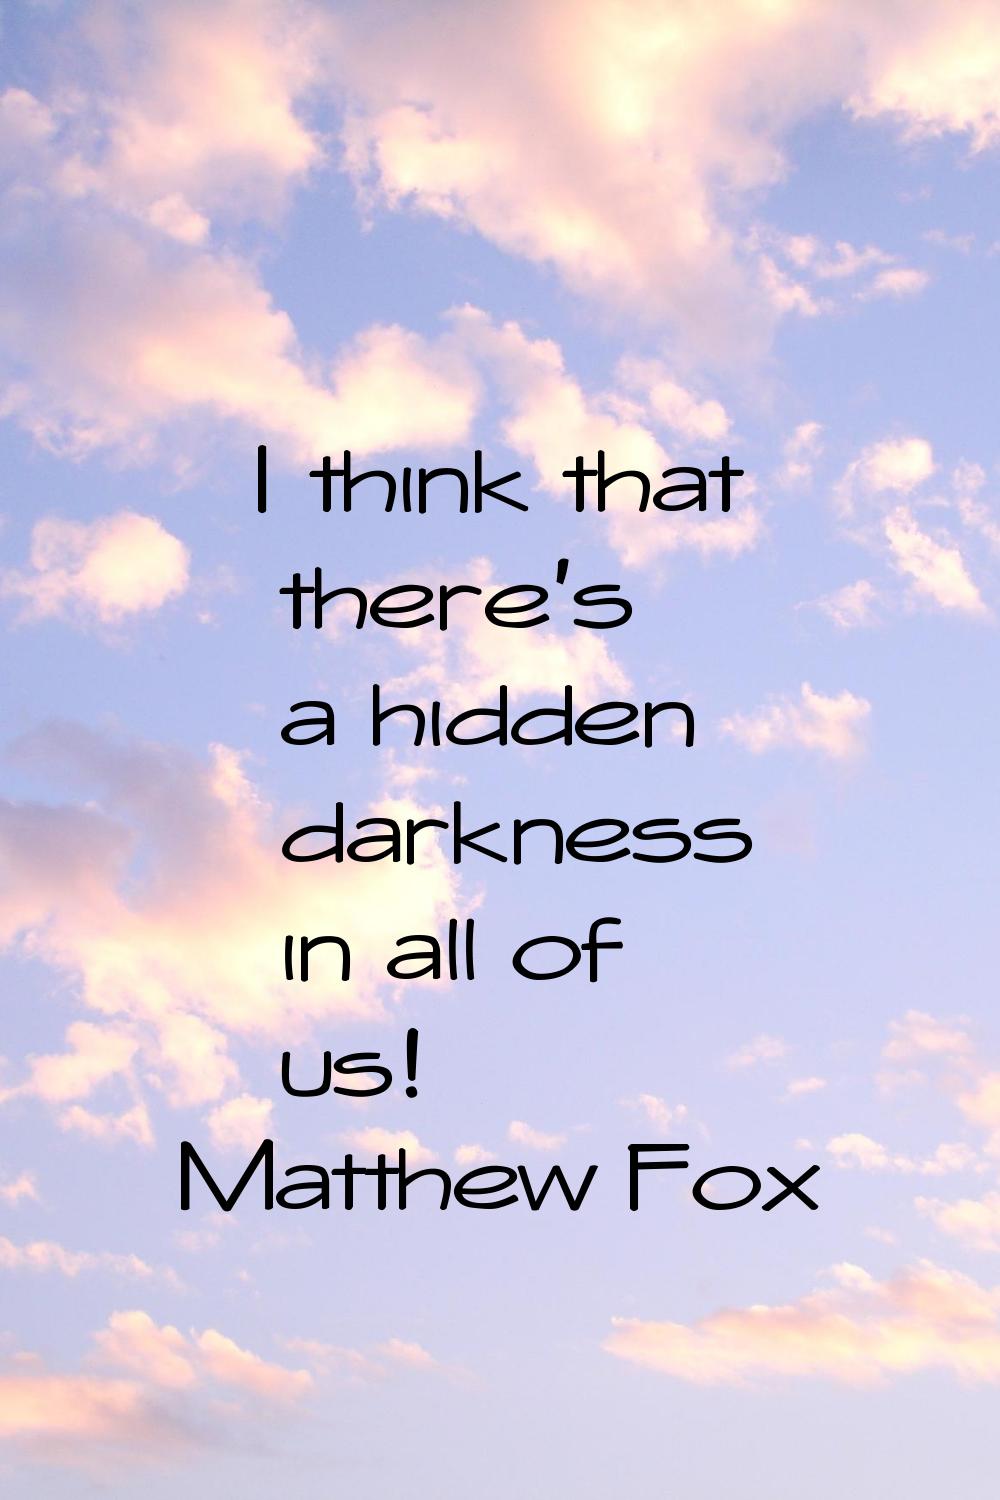 I think that there's a hidden darkness in all of us!